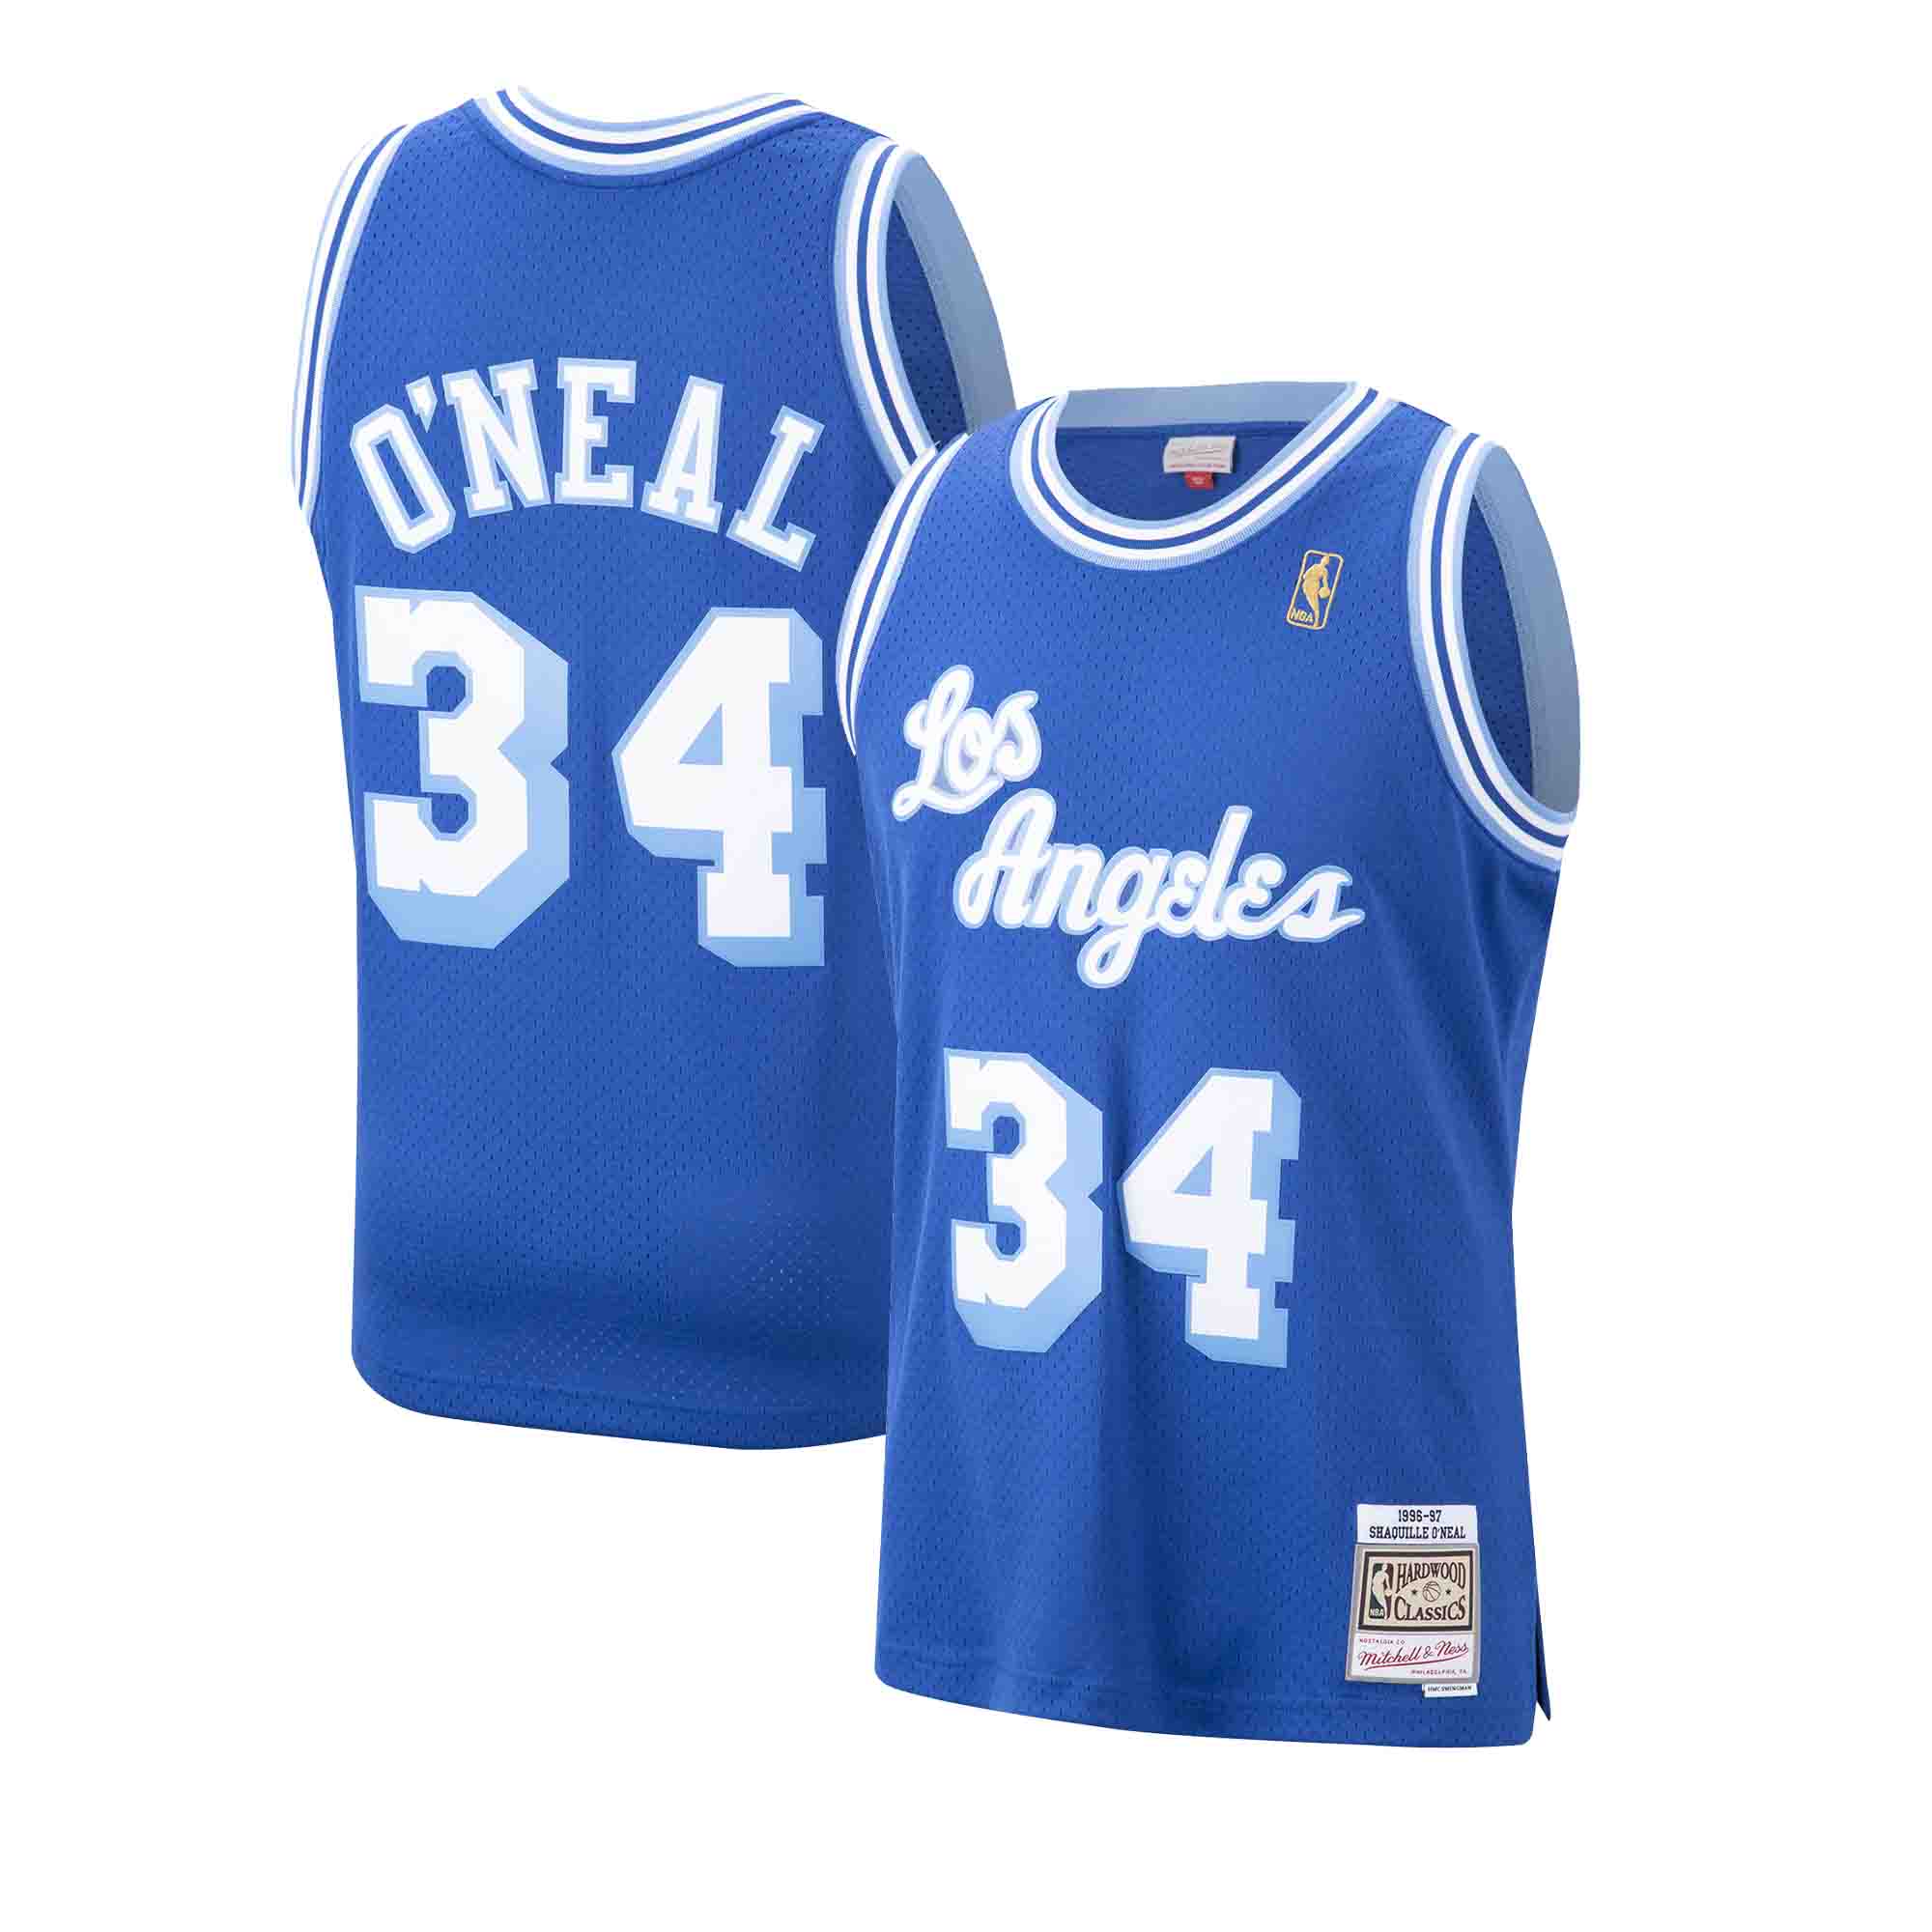 Los Angeles Lakers #34 Shaquille O'Neal Mitchell – Exclusive